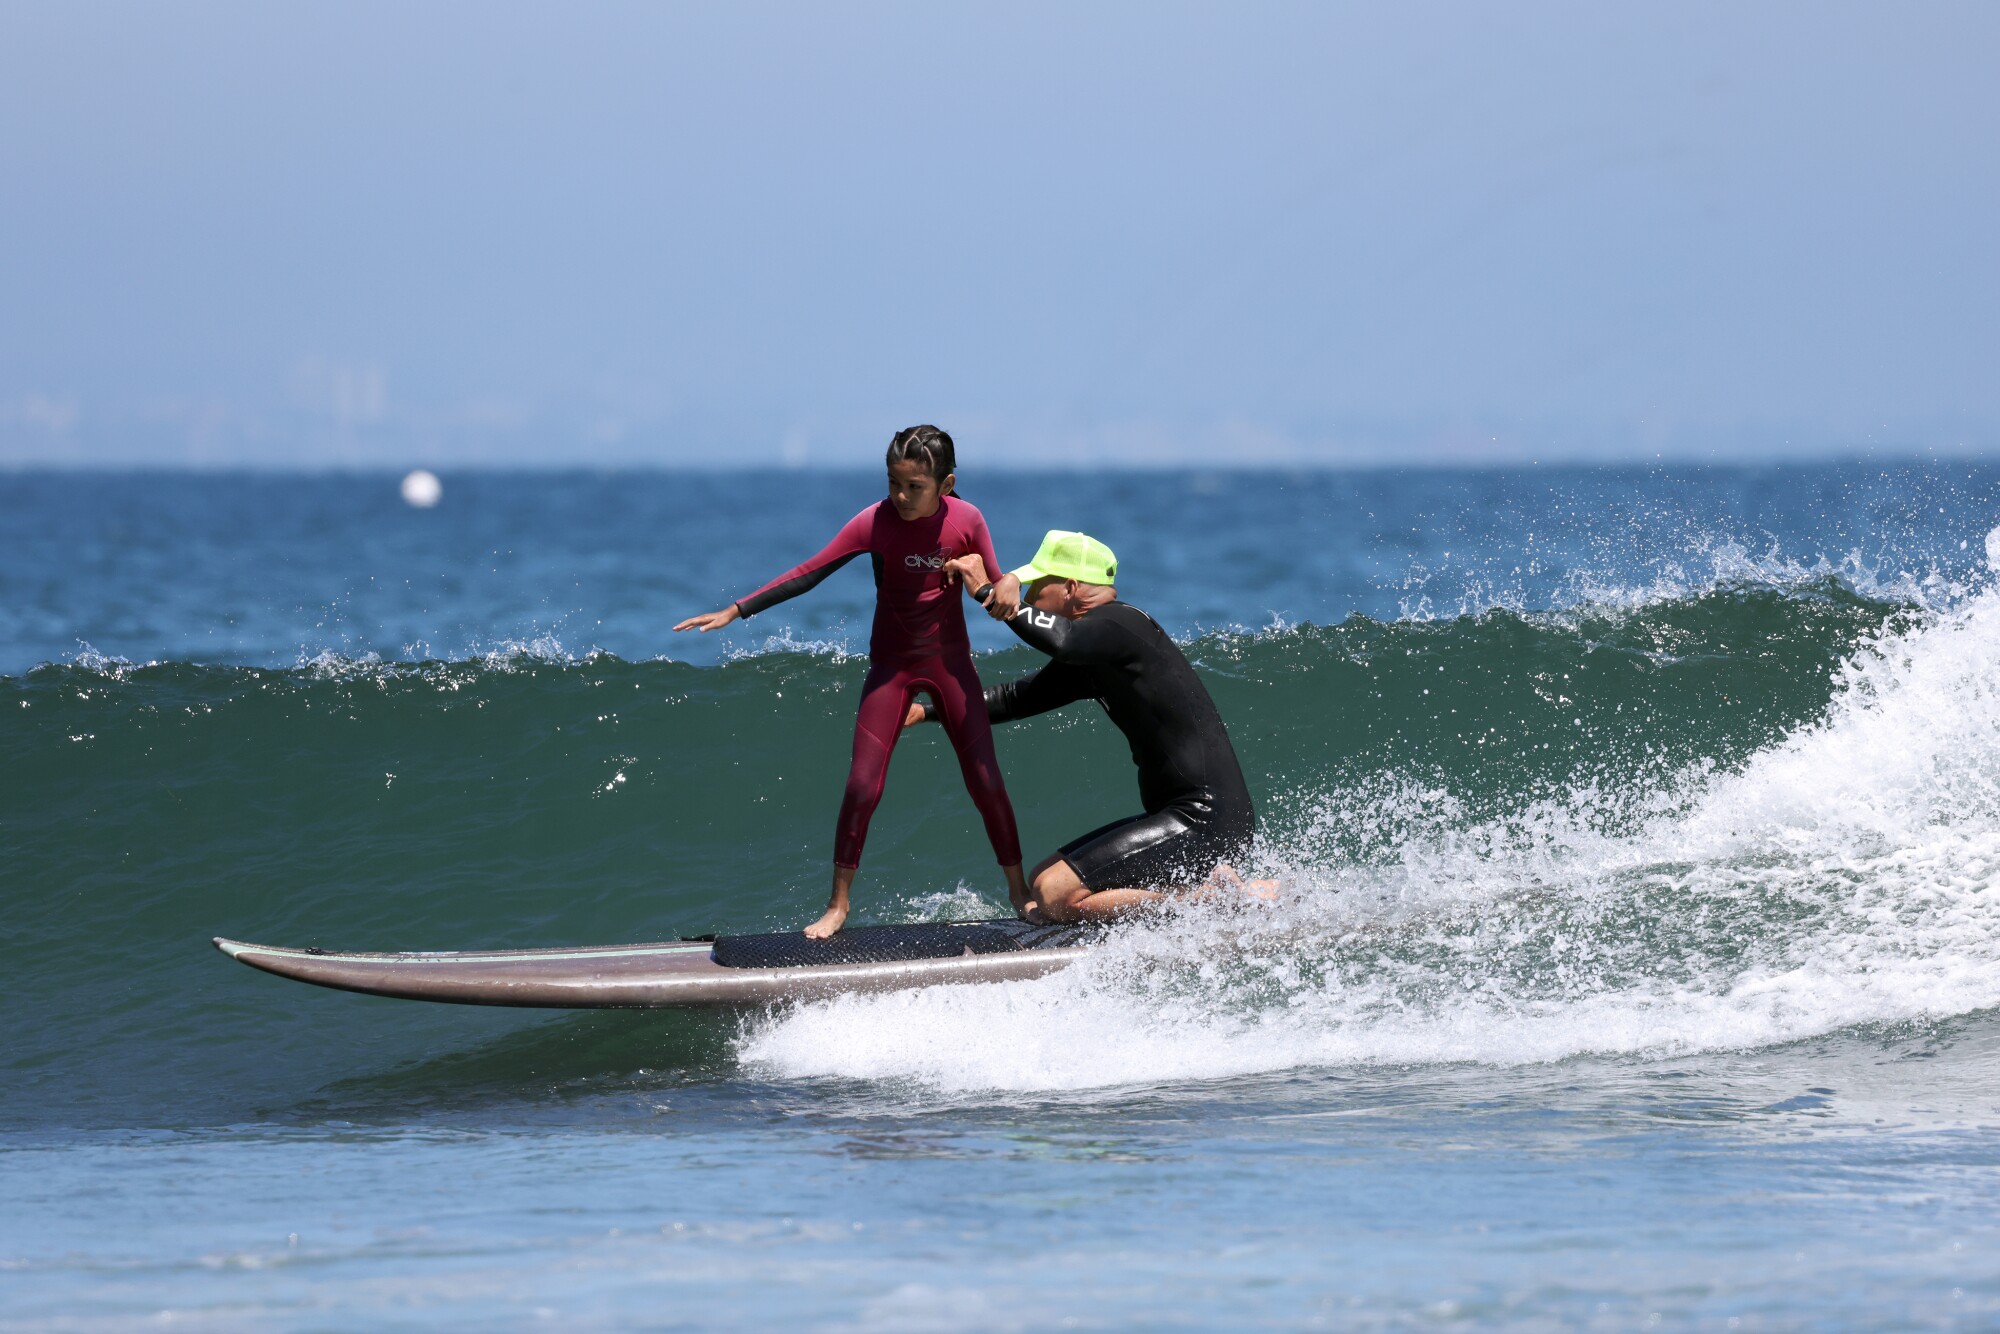 Carolina Santiago and instructor Jean Pierre Pereat, right, ride a wave during a Los Courage Camp event at First Point.